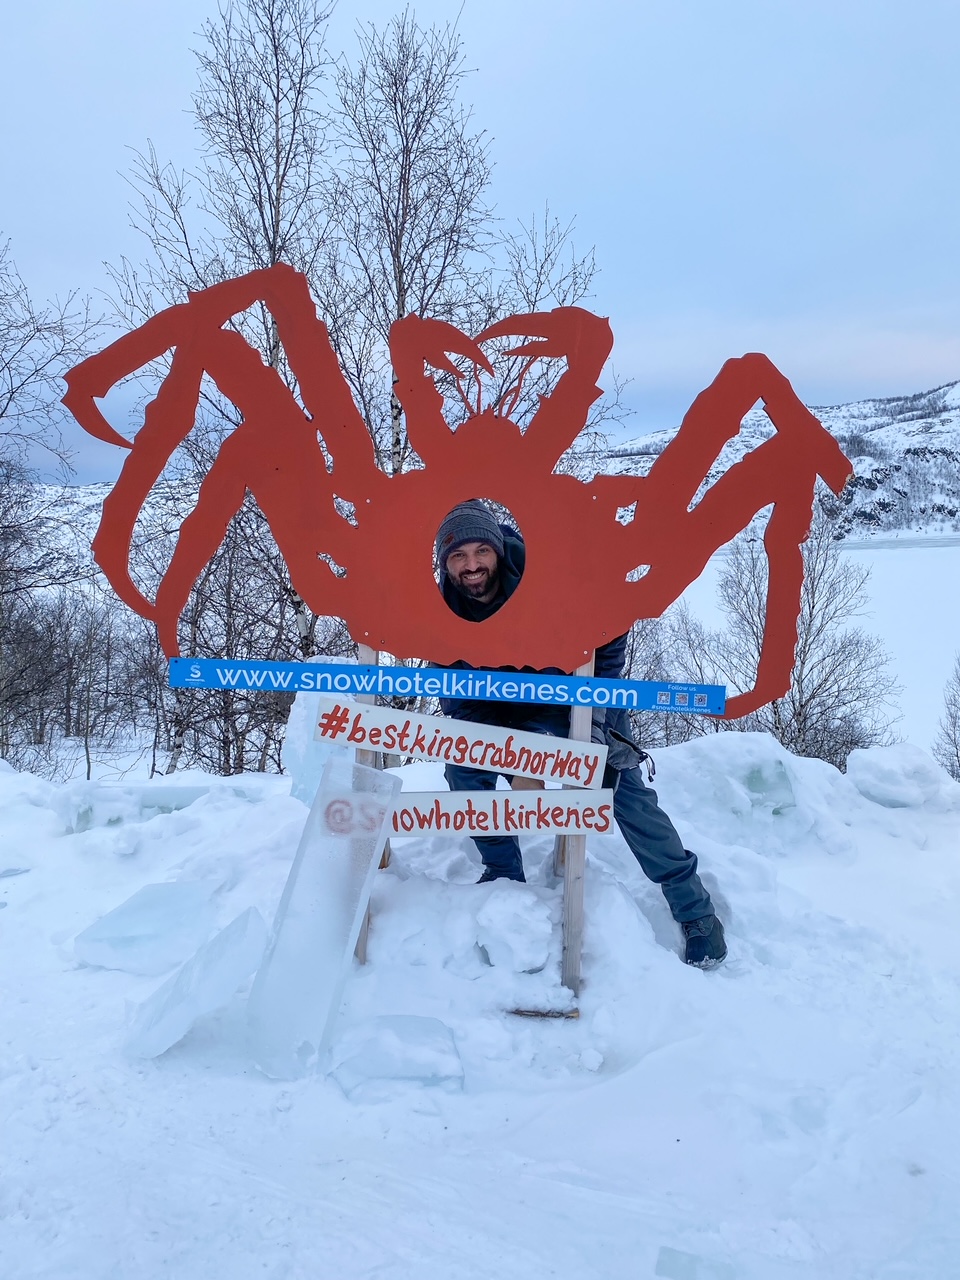 Tim after the Norway King Crab Safari at the Snowhotel Kirkenes